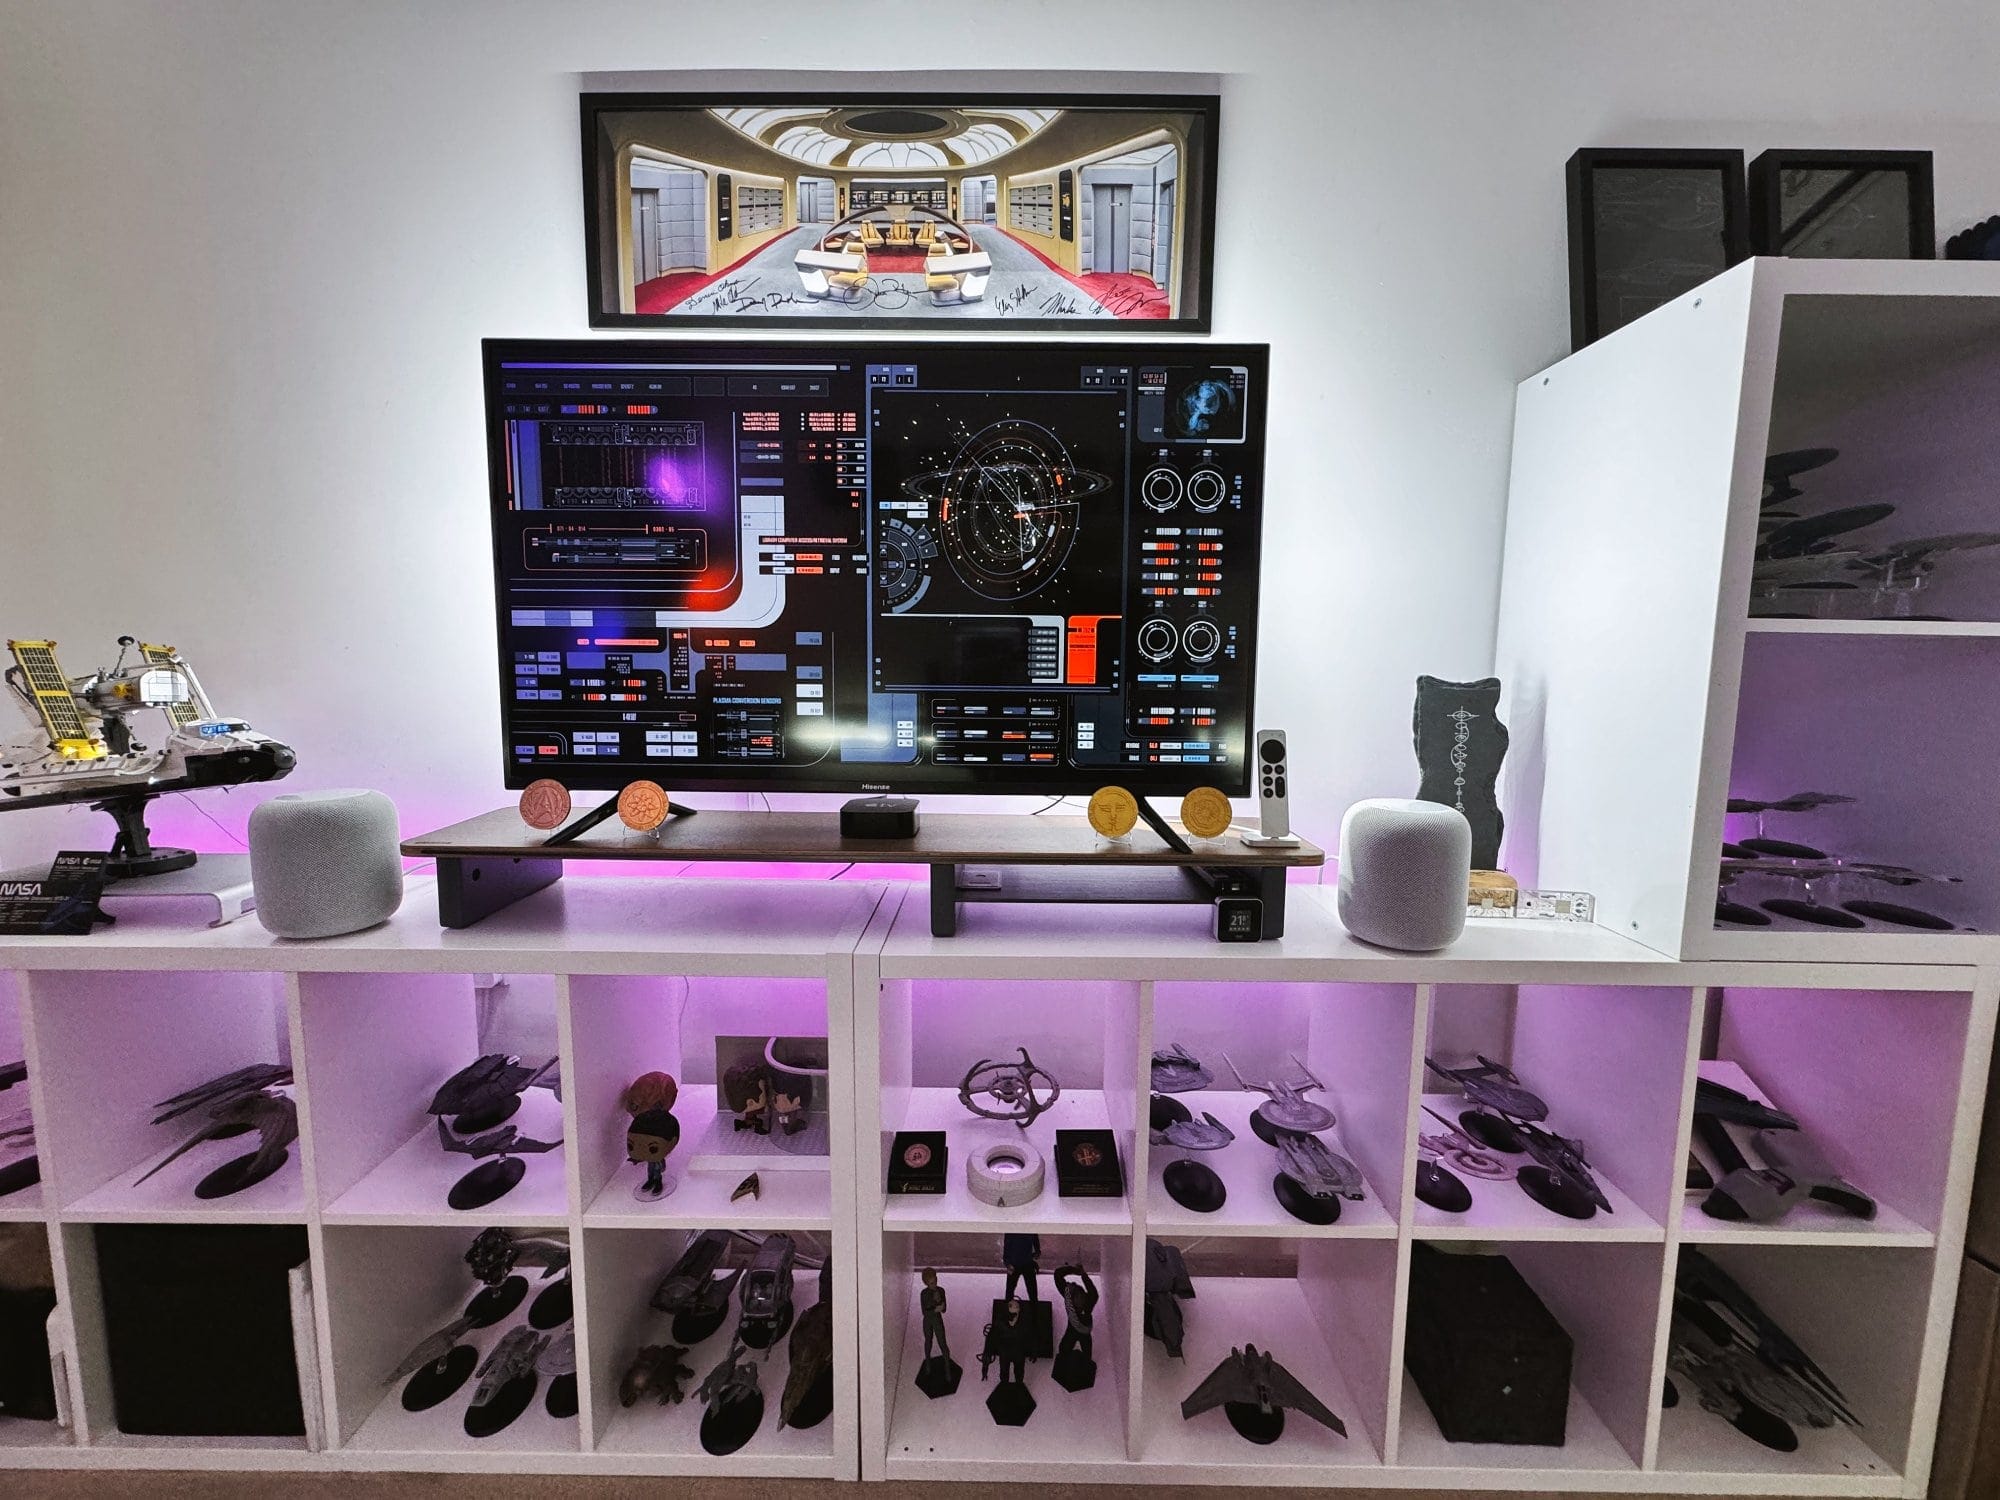 A close-up of a home office setup with a large display screen, various Star Trek starship models on a white shelving unit, and sci-fi themed artwork above the monitor